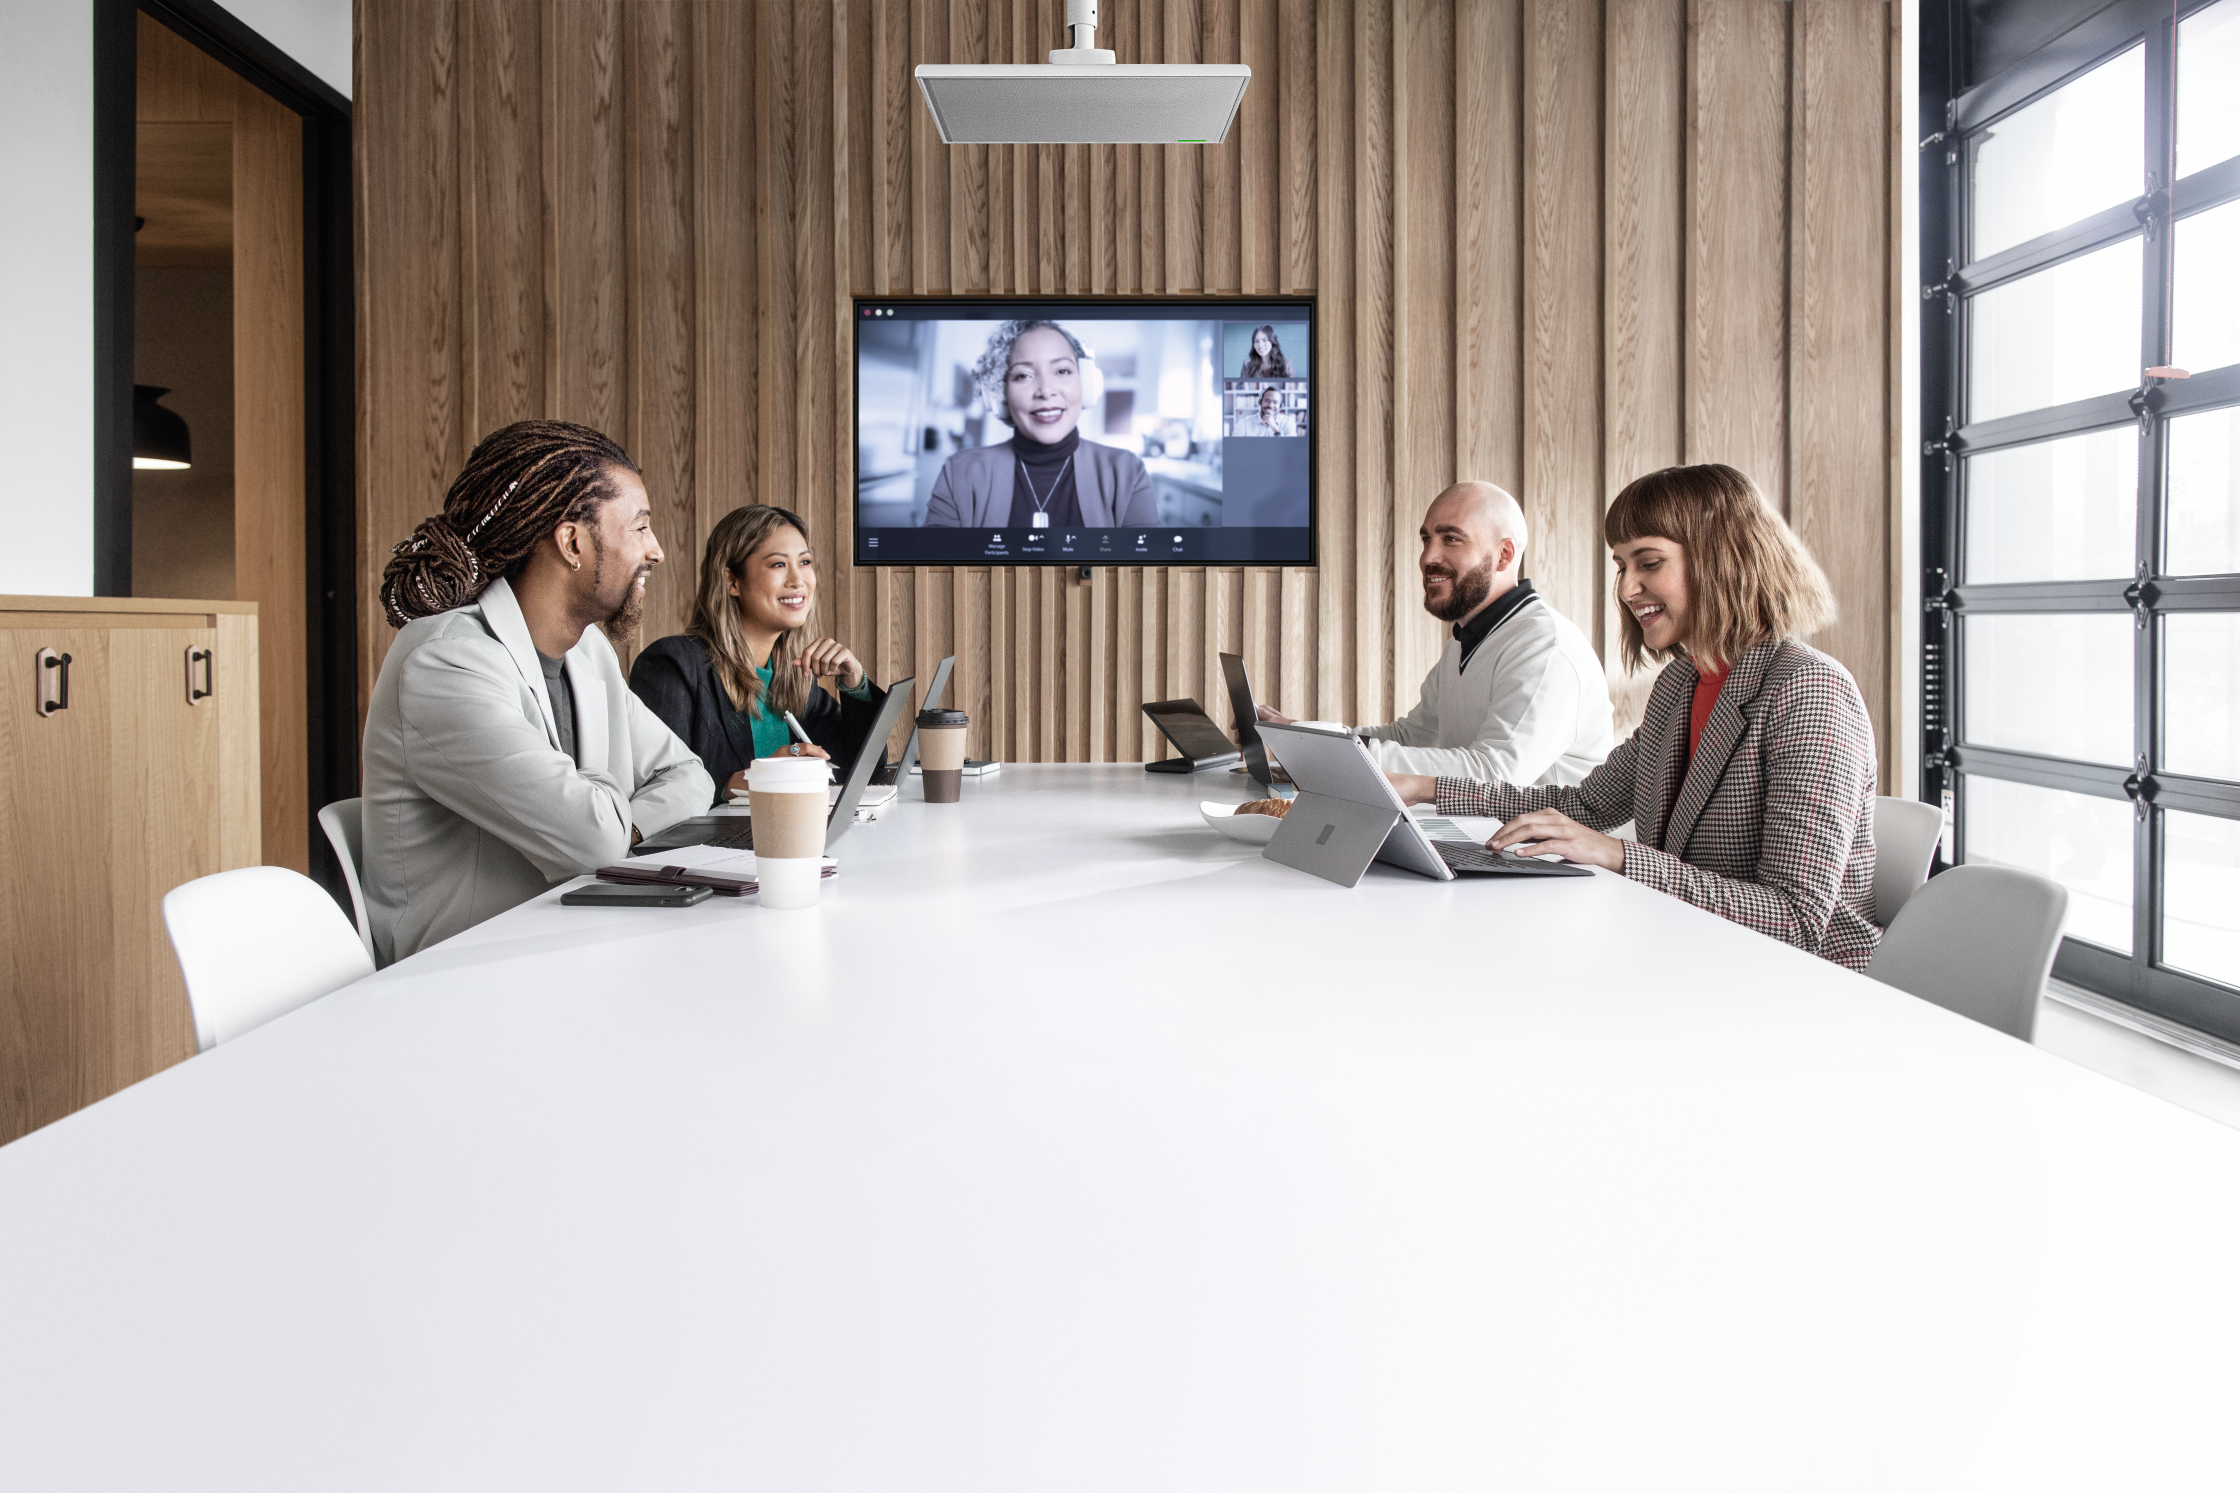 Edge Electronics - Conferencing and Meetings - NMK